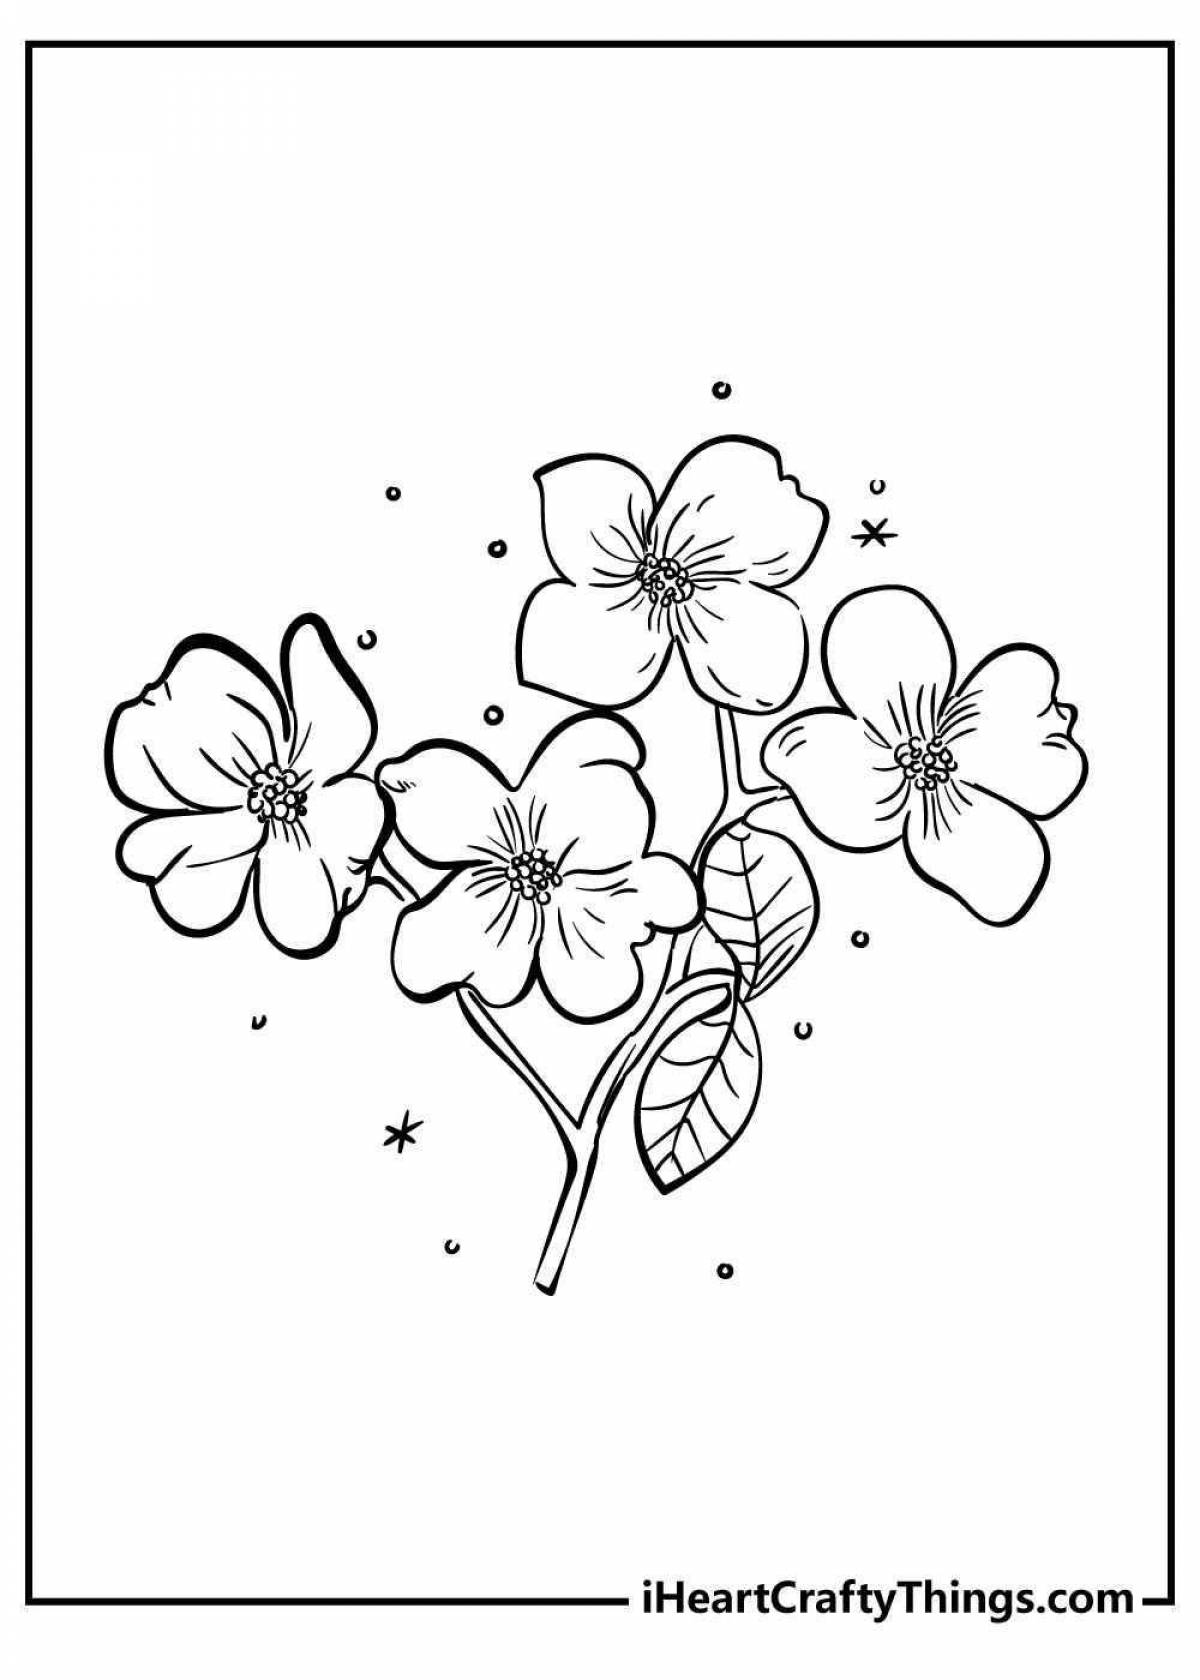 Coloring book cheerful forget-me-not flower